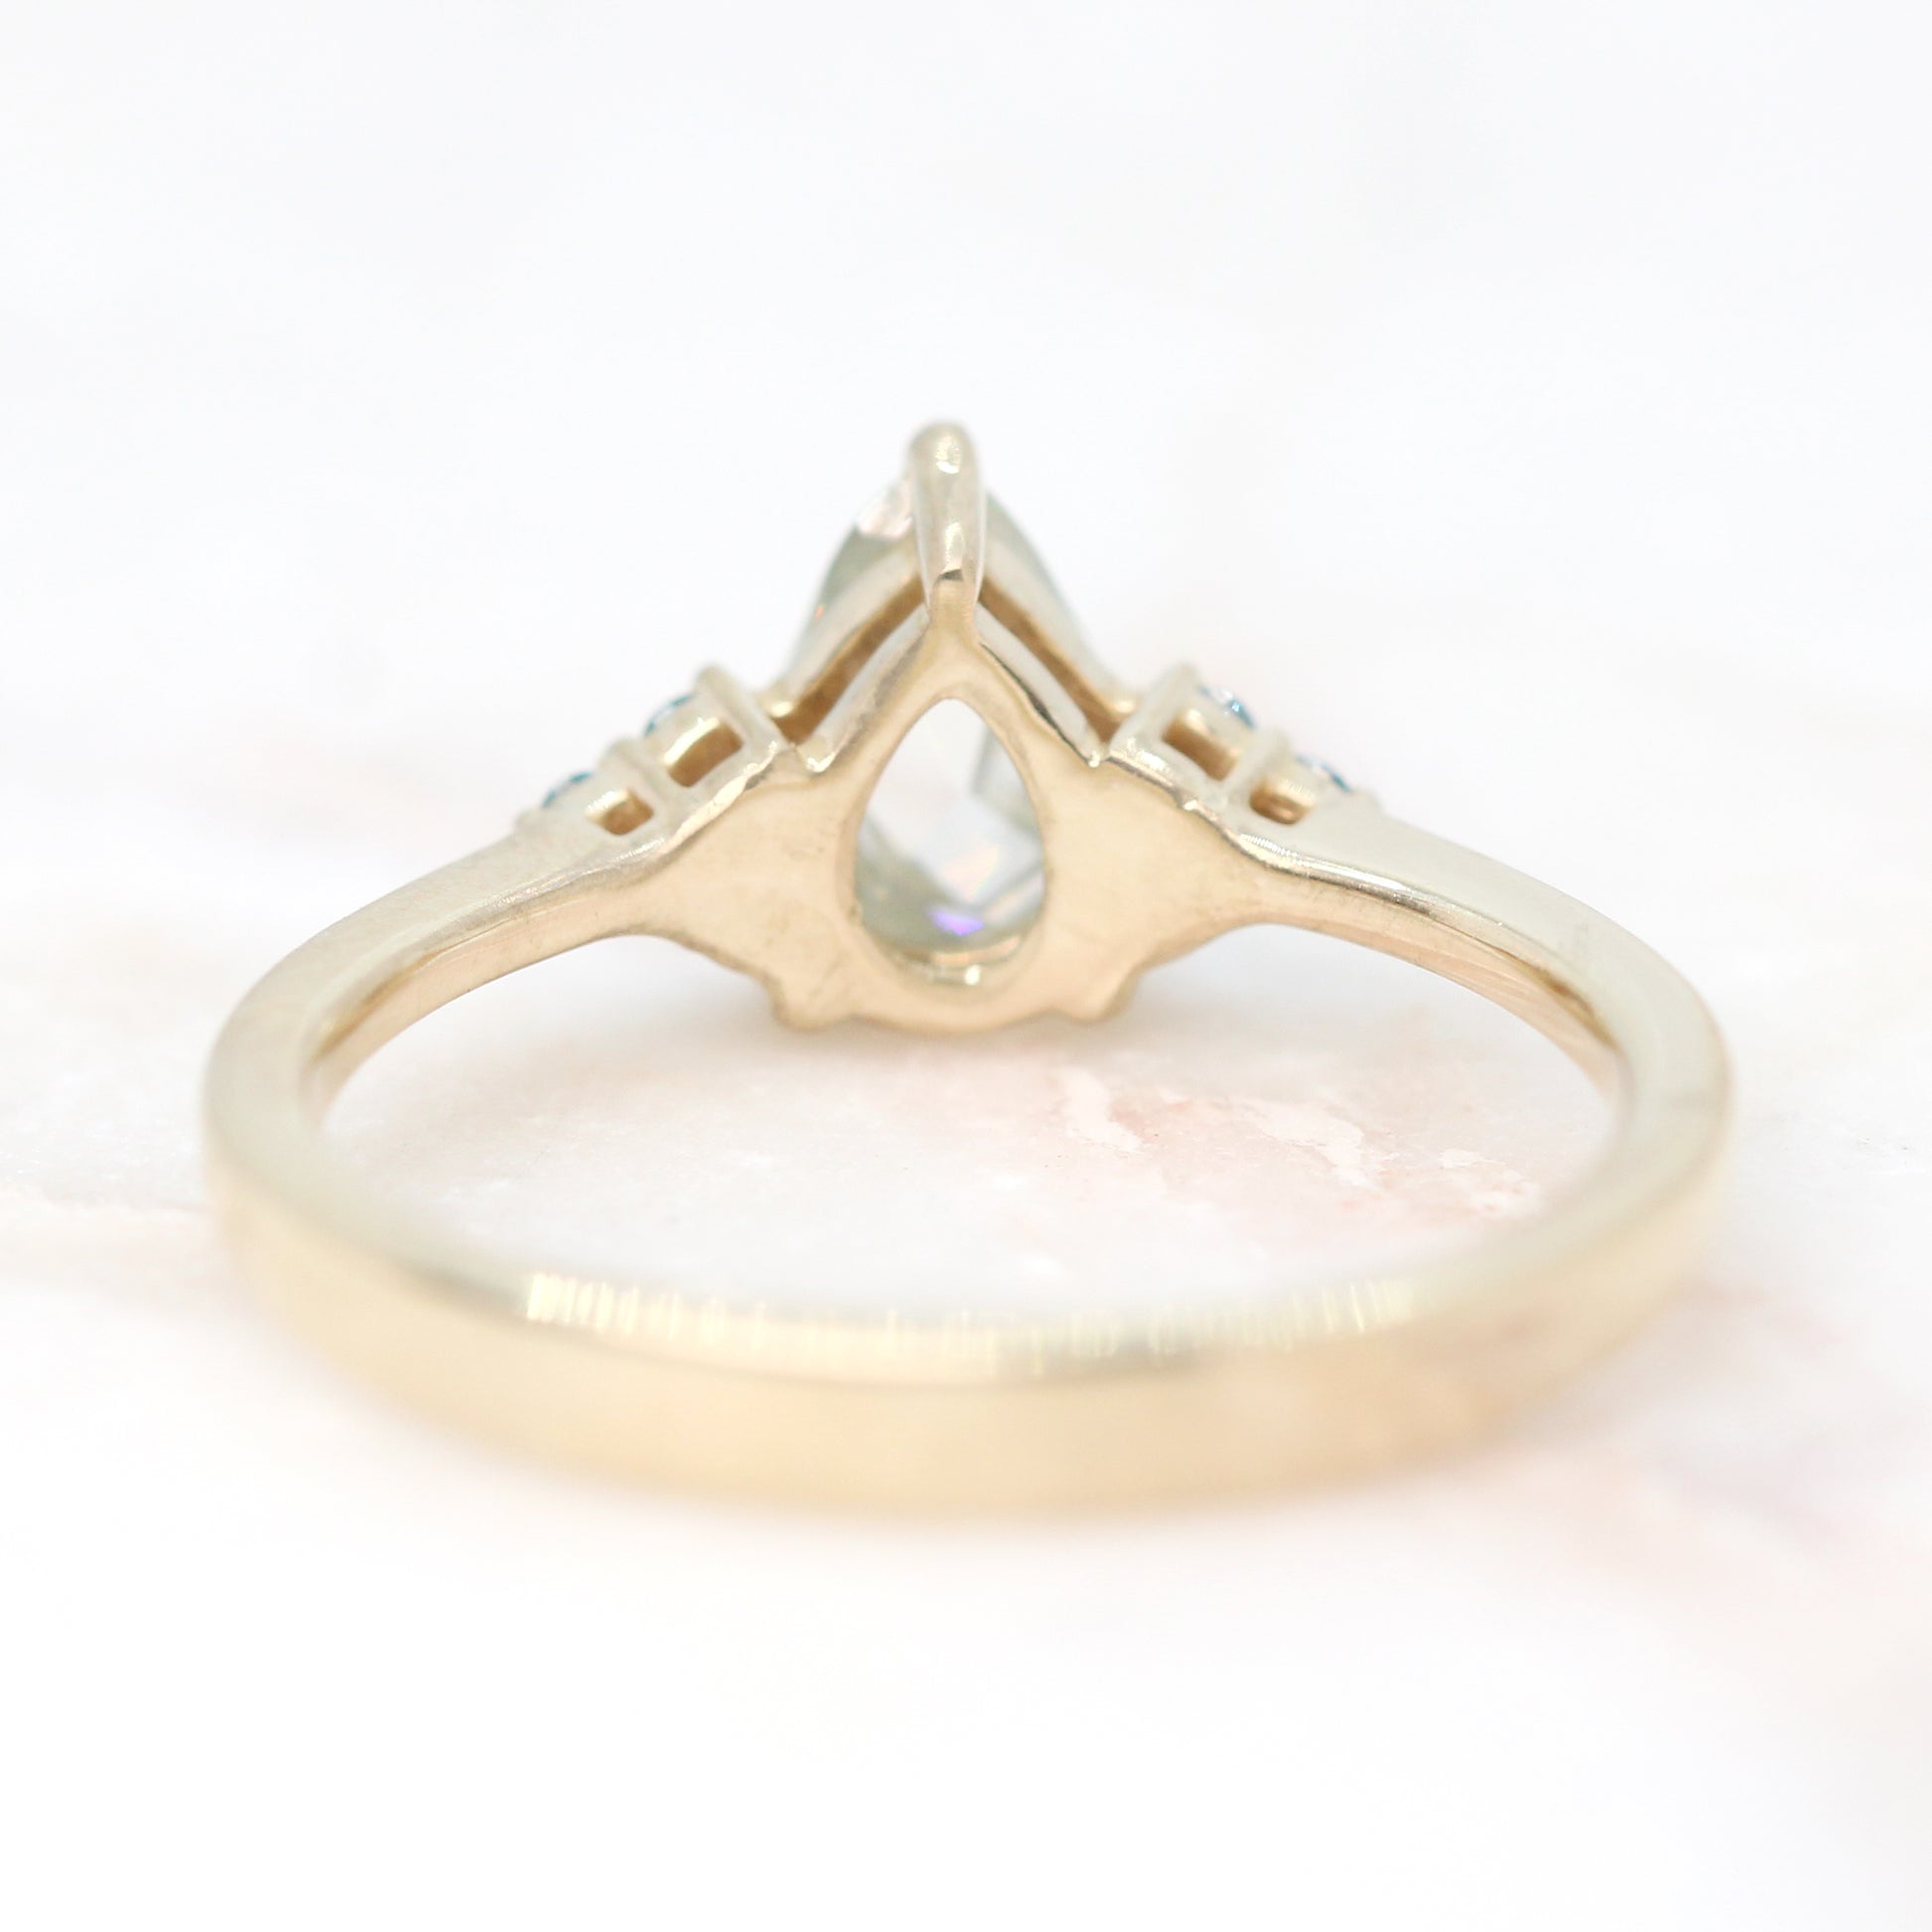 Imogene Ring with a 0.74 Carat Clear Pear Moissanite and Blue Diamond Accents in 14k Yellow Gold - Ready to Size and Ship - Midwinter Co. Alternative Bridal Rings and Modern Fine Jewelry